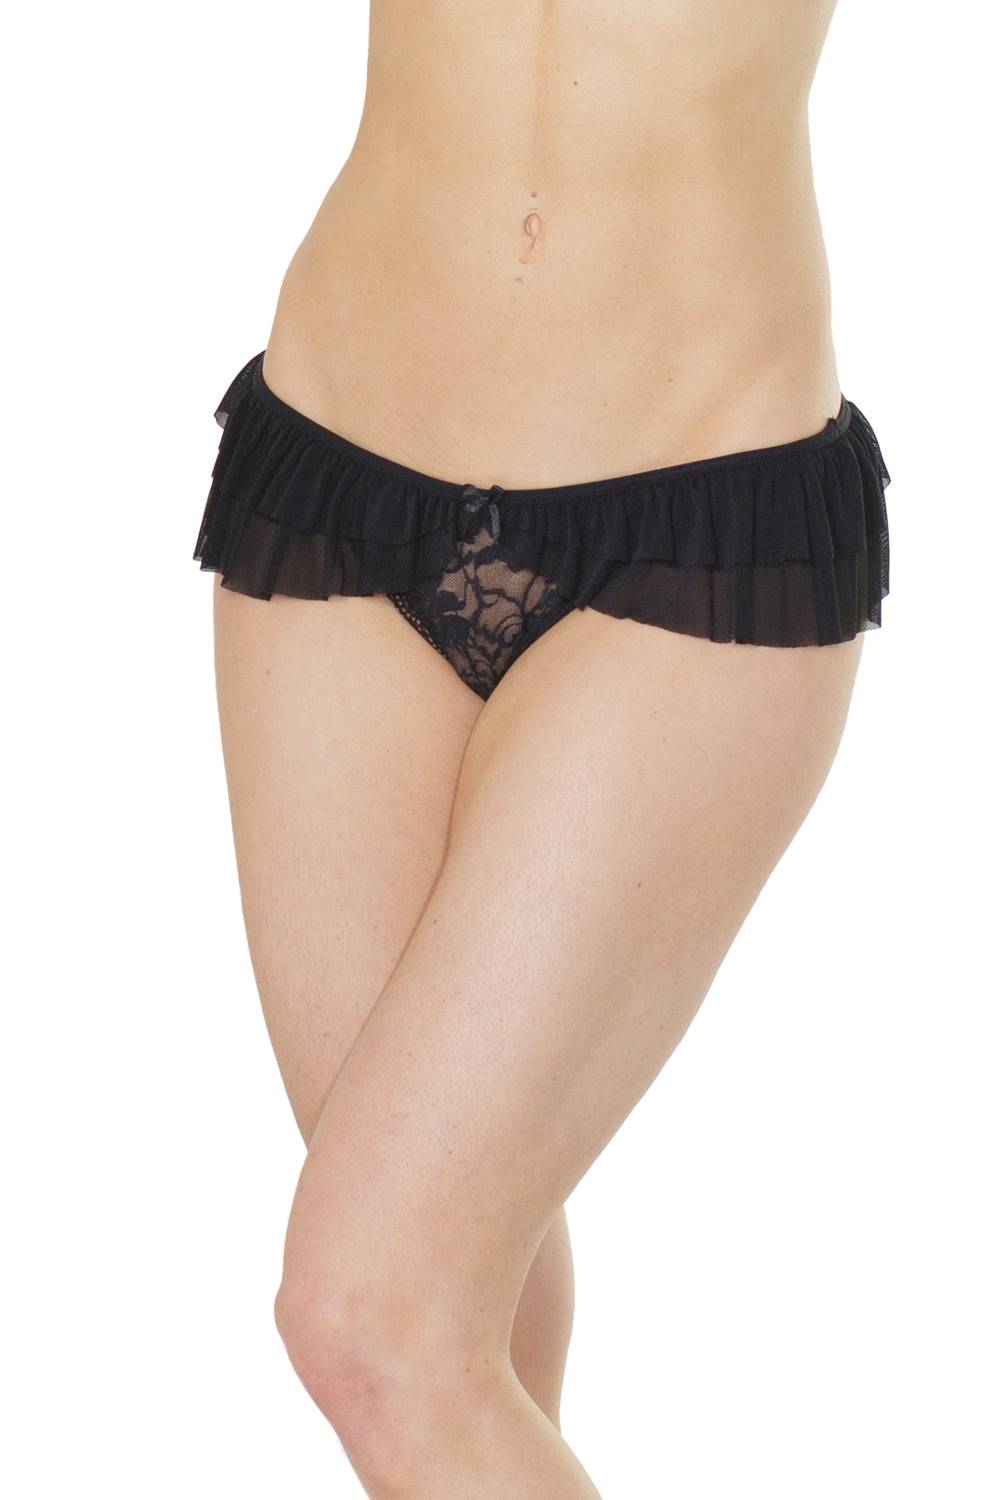 Coquette - 374 - Crotchless Panty - Stag Shop